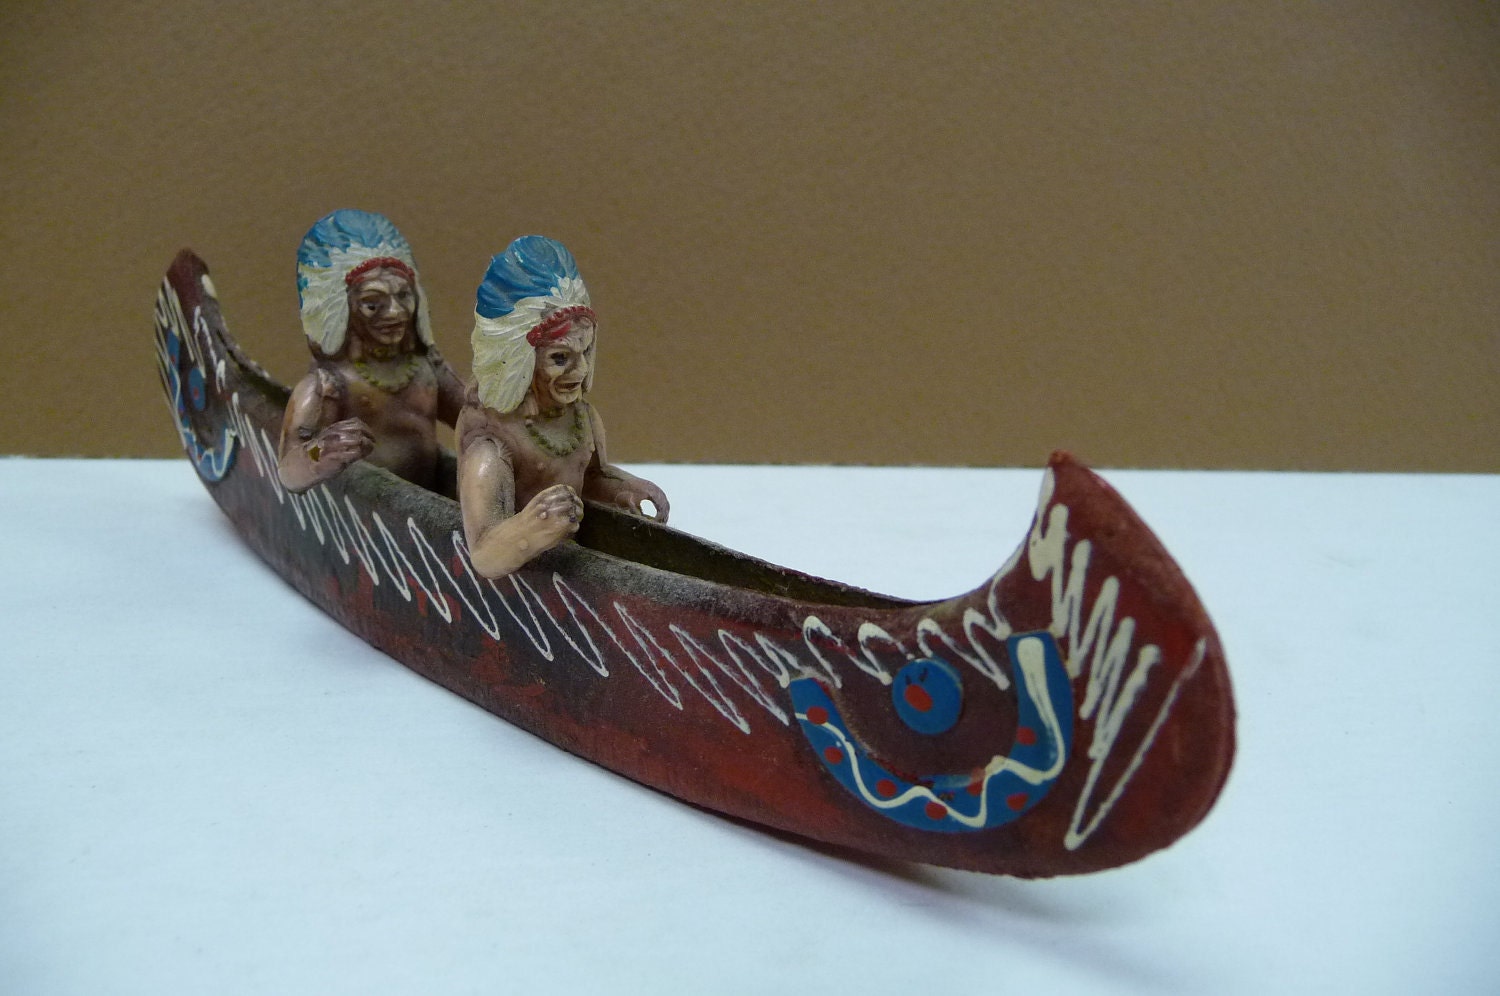 Vintage toy wood canoe Hand painted 2 plastic Indians up a